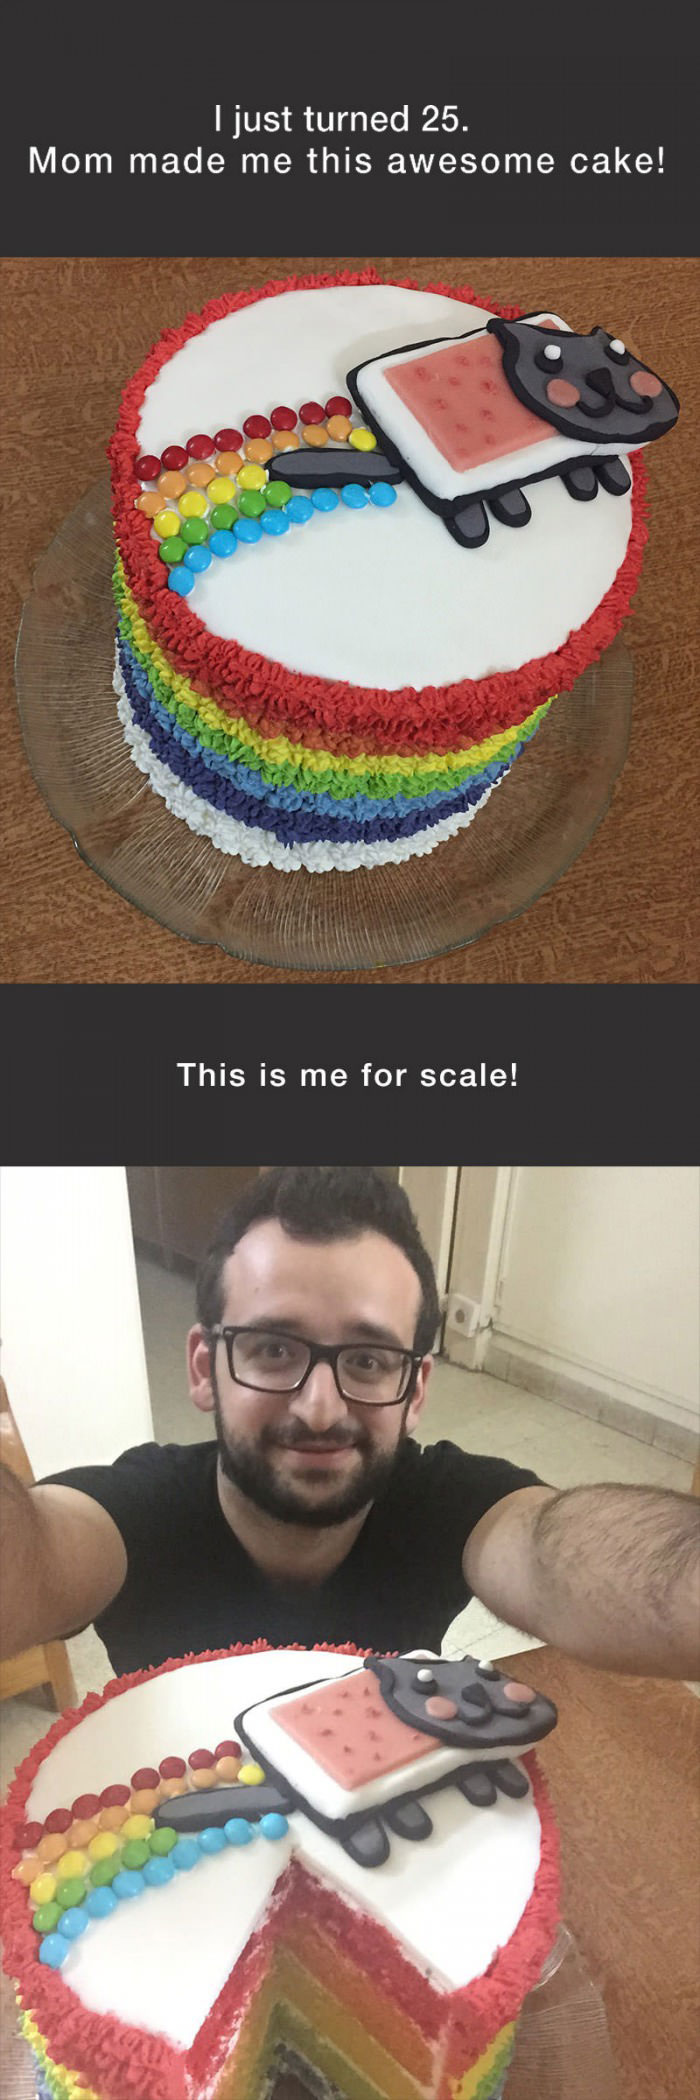 i just turned 25, mom made this awesome cake, nyan cat